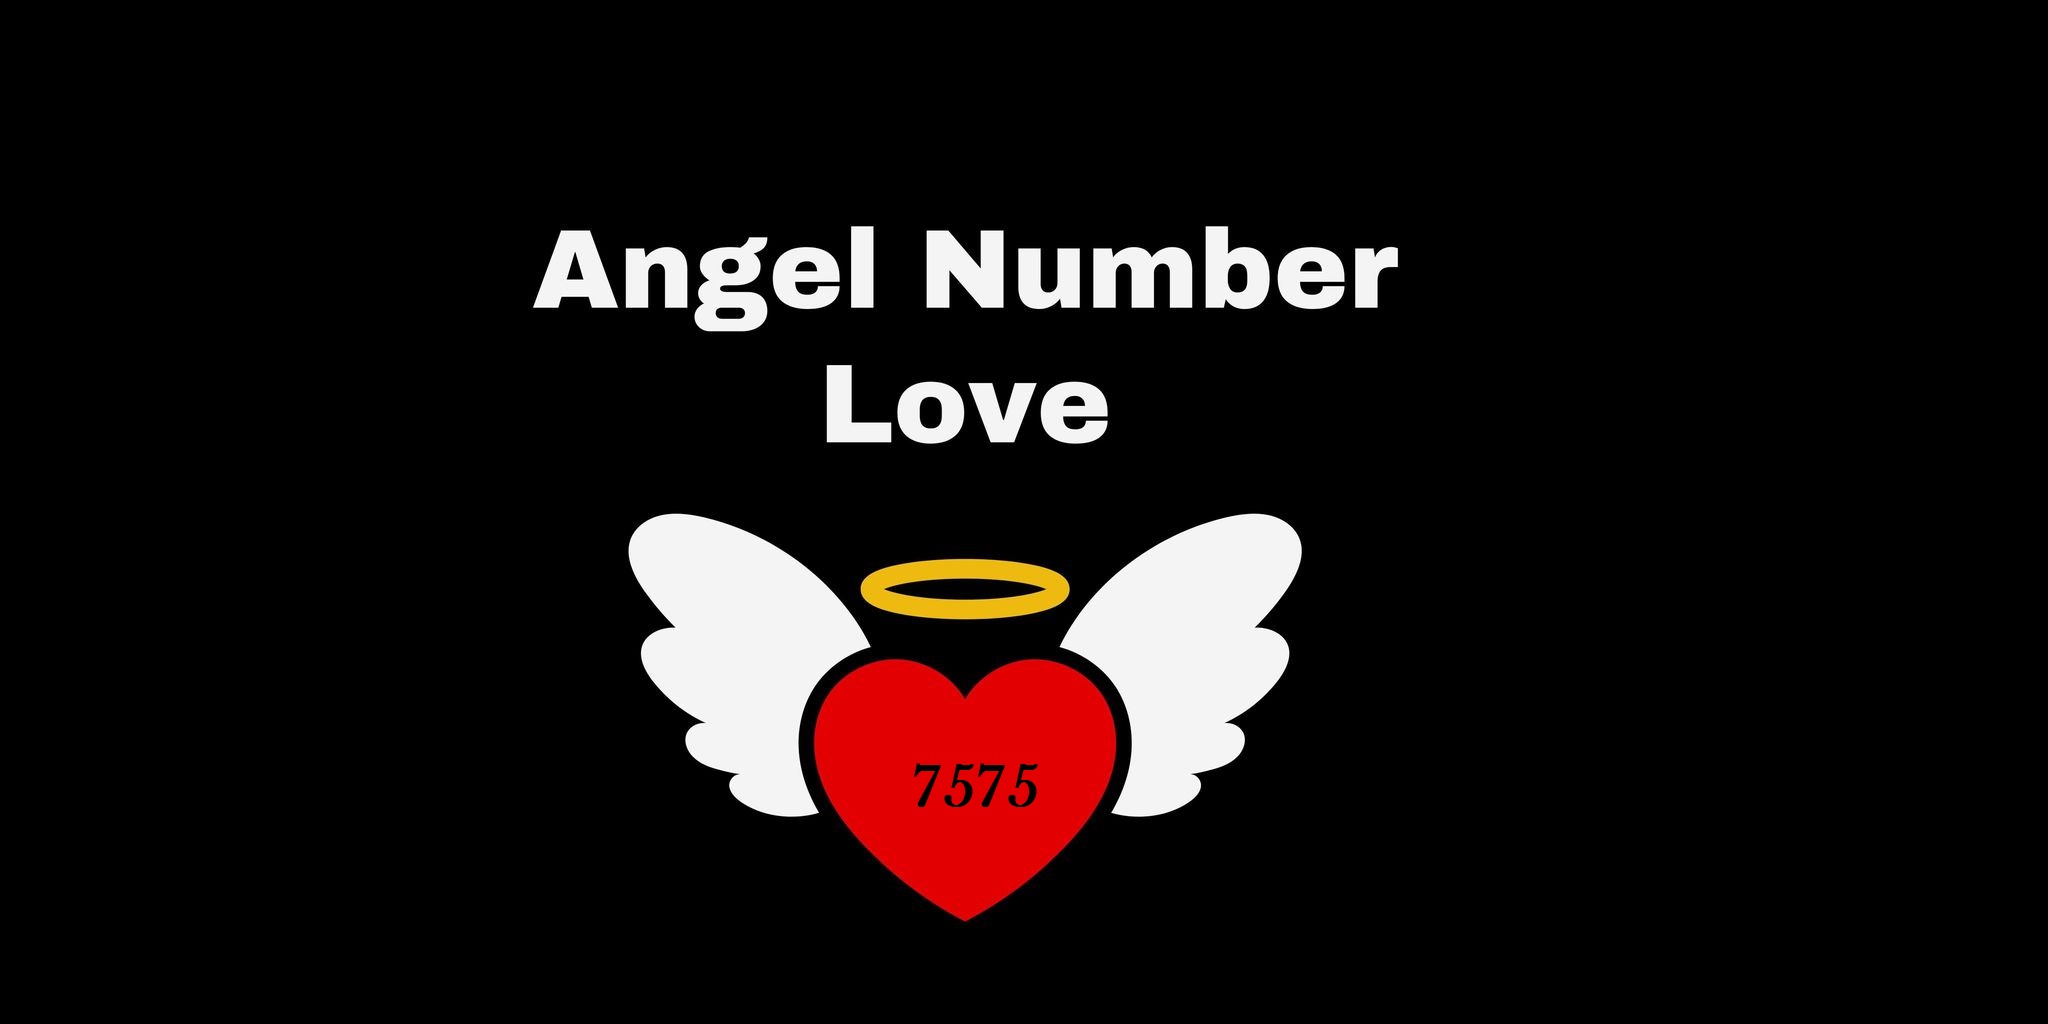 7575 Angel Number Meaning In Love